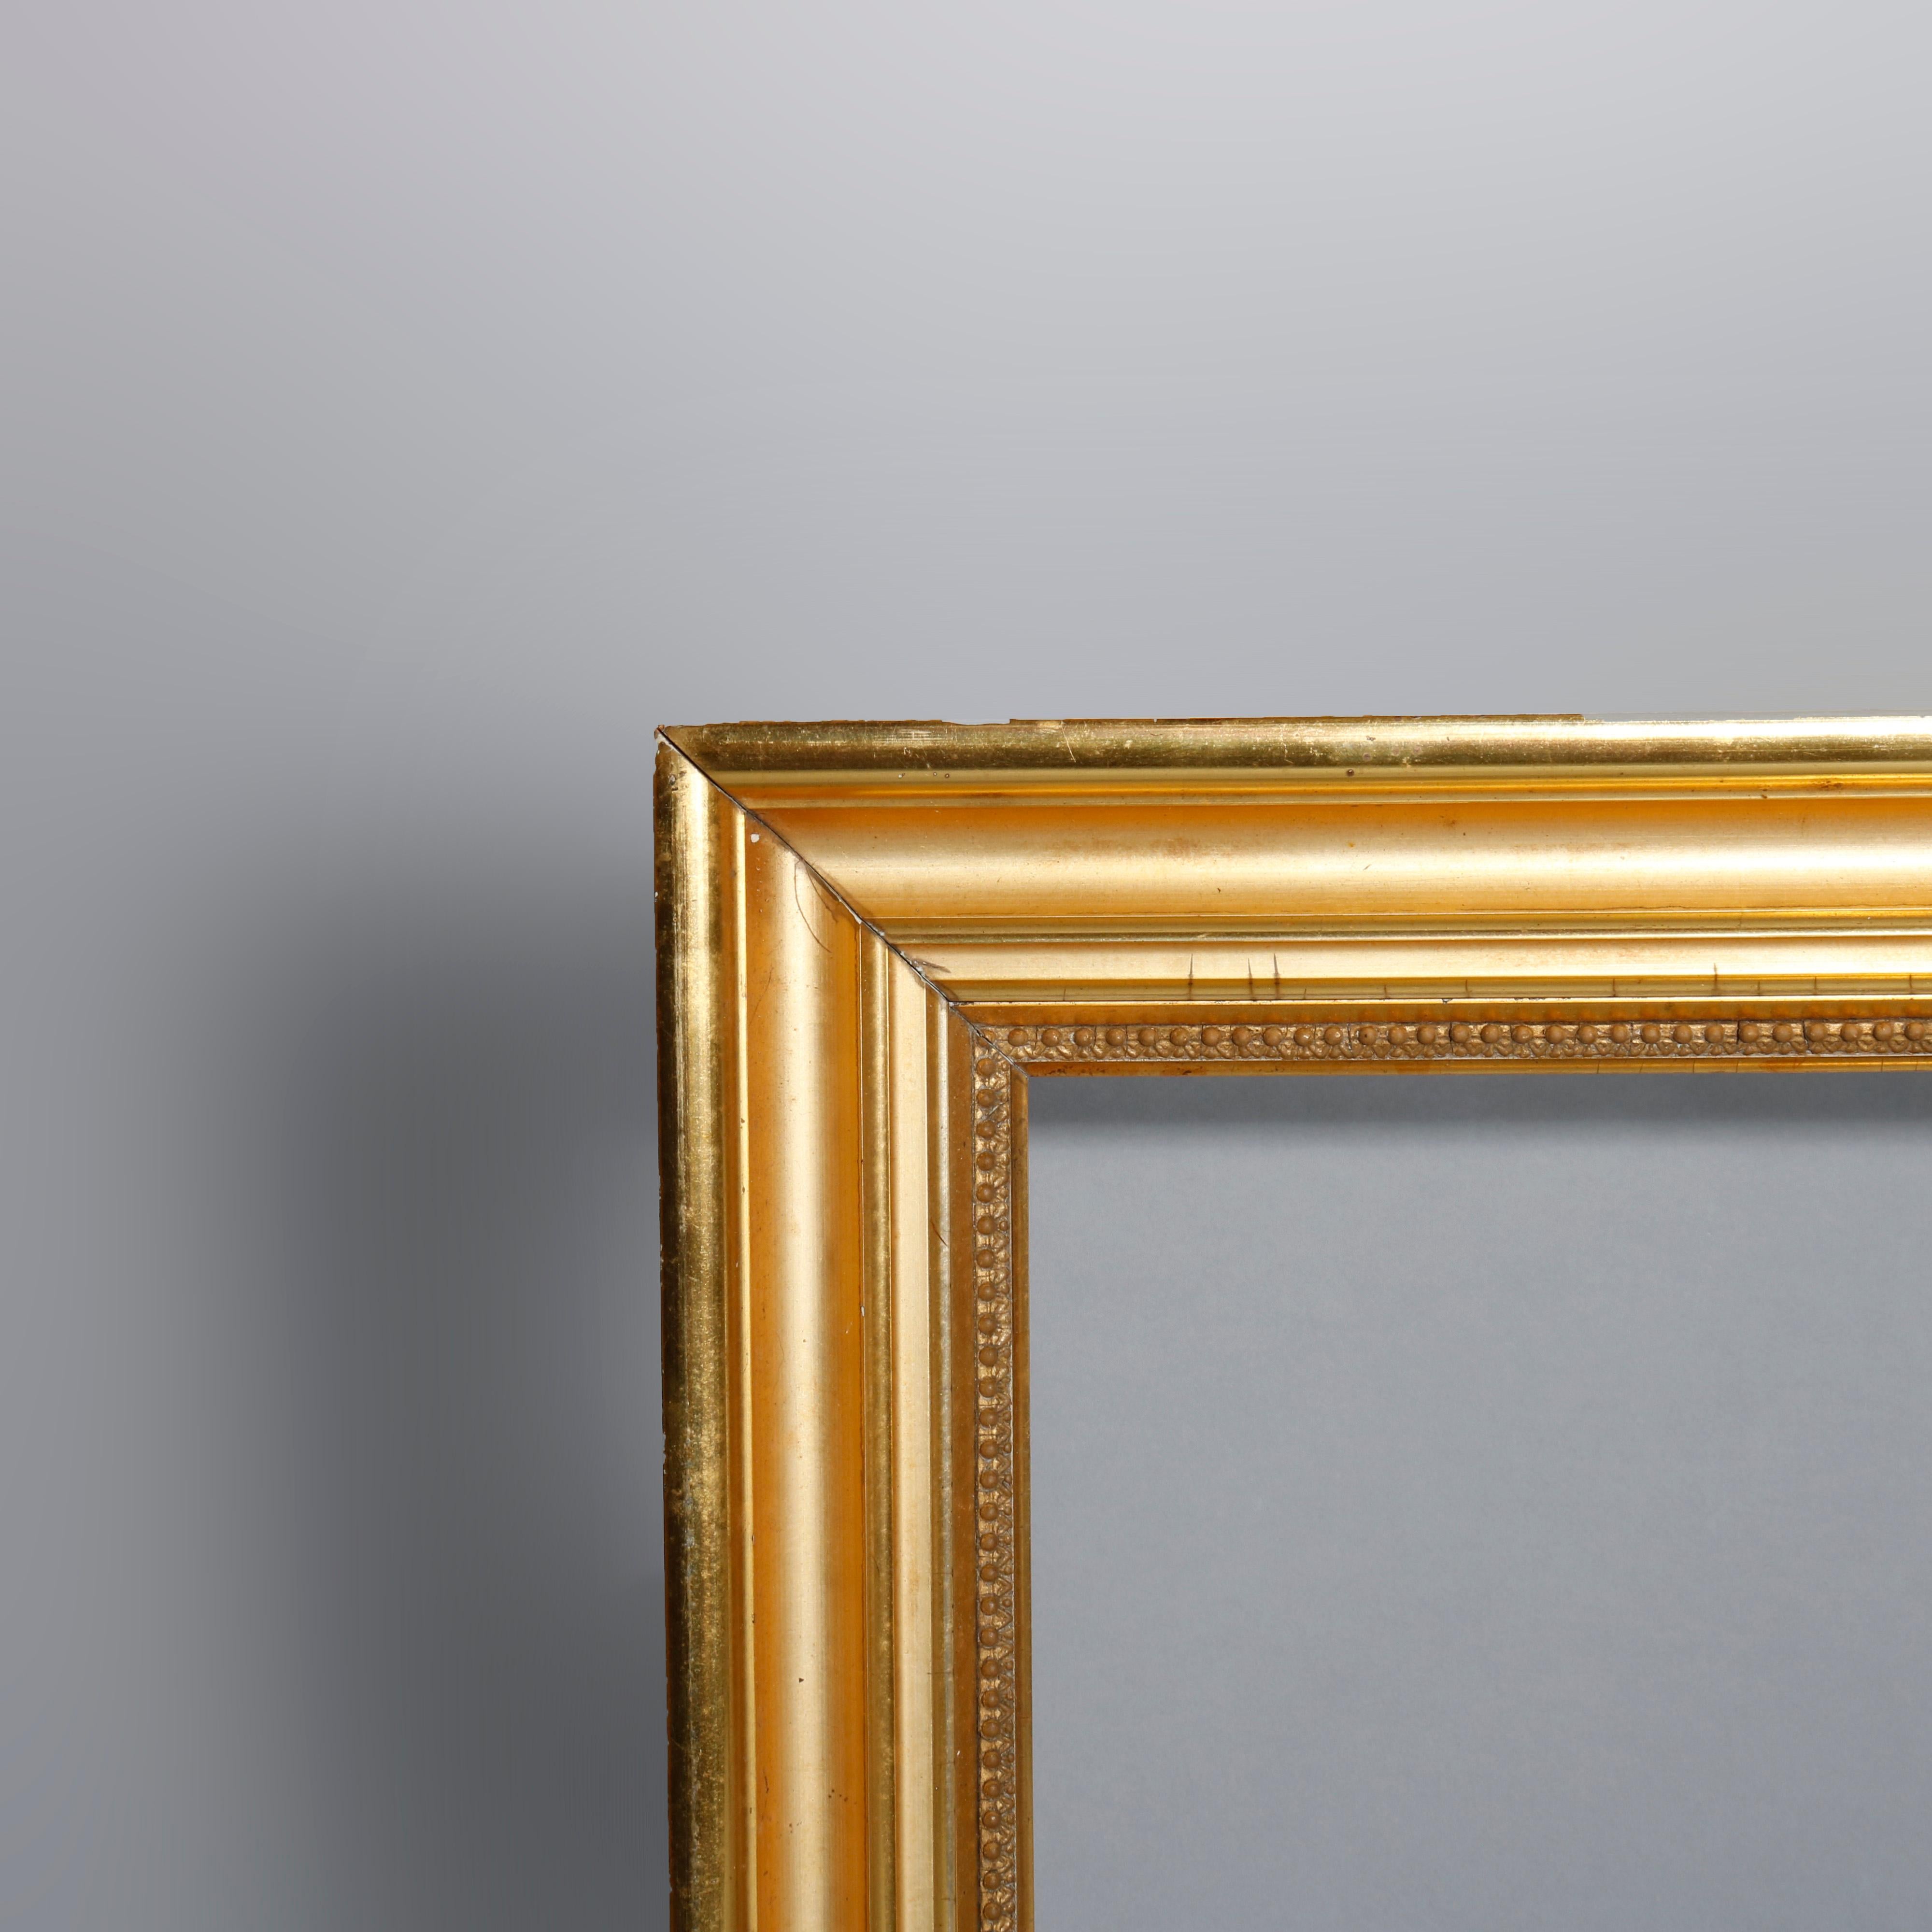 An antique first finish lemon giltwood painting frame, circa 1840

Measures: 22